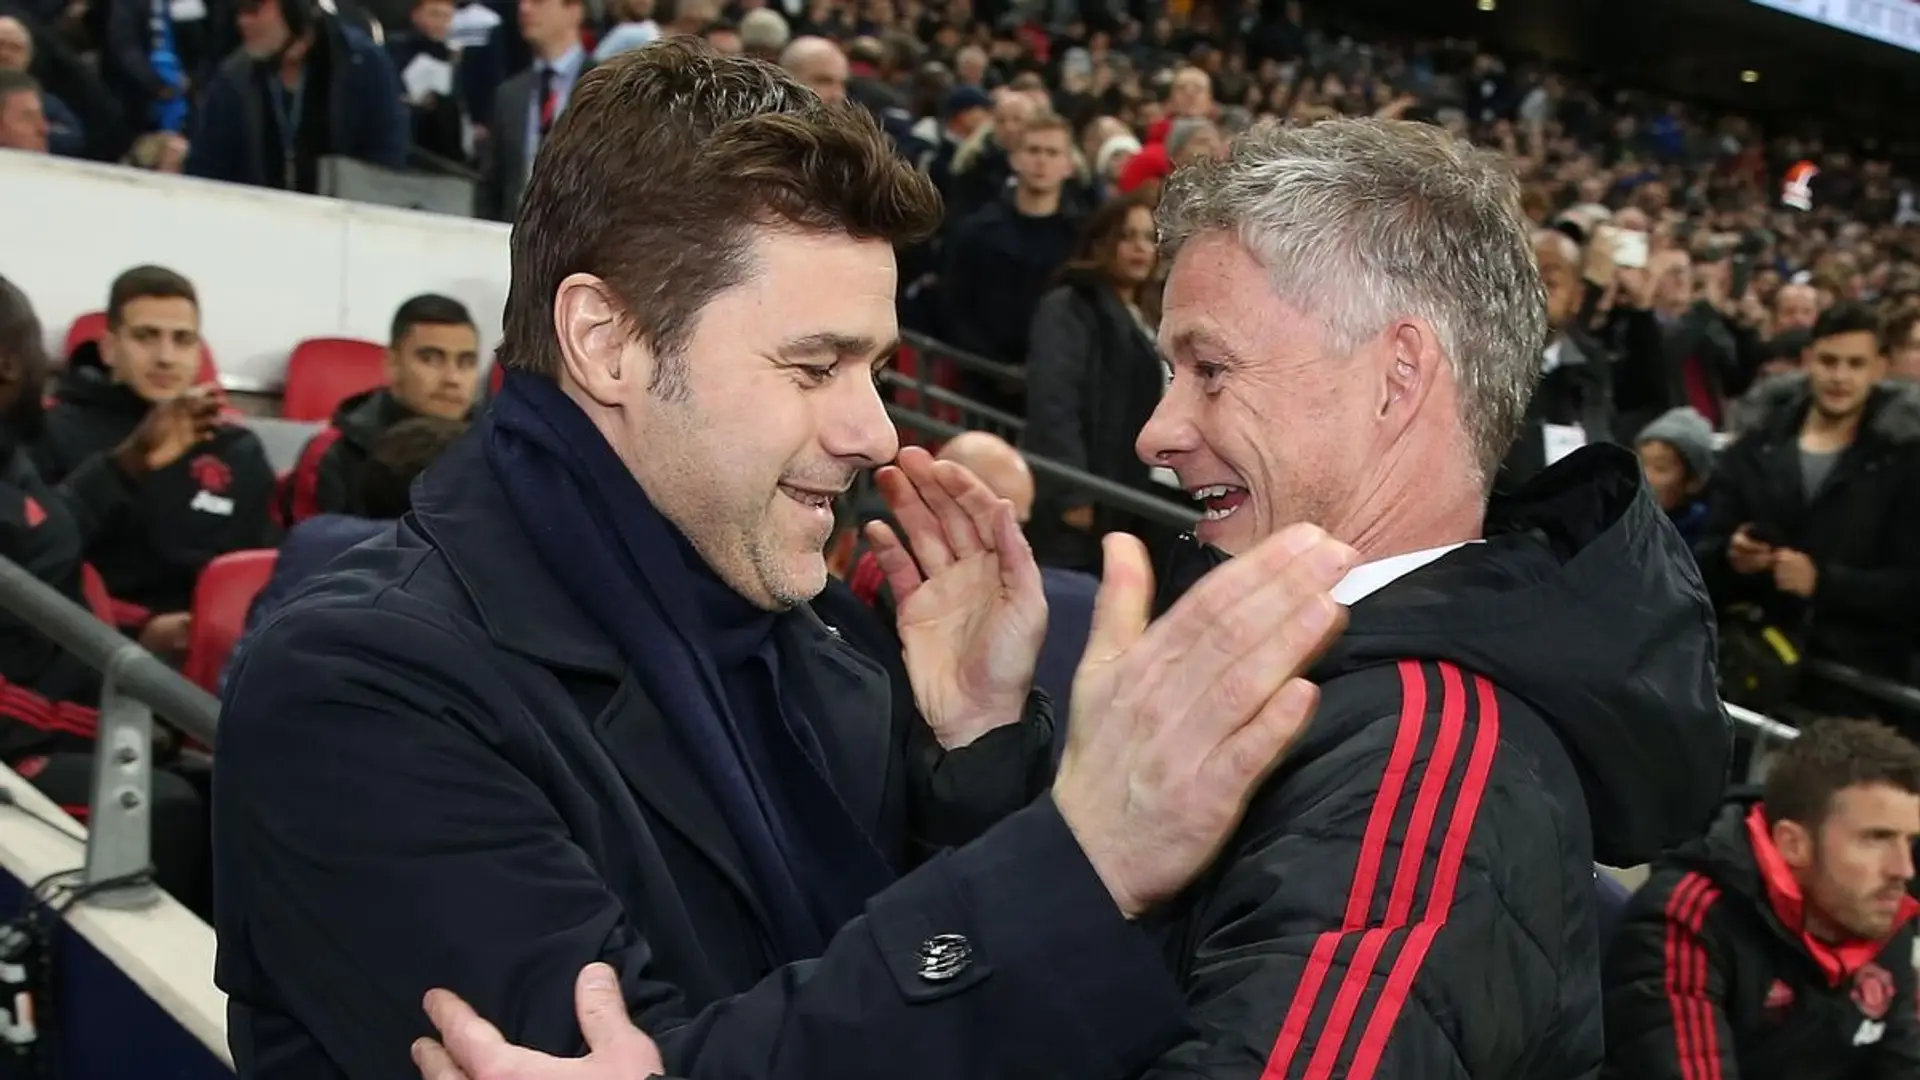 Mauricio Pochettino will take Man United over but keep your joy level low